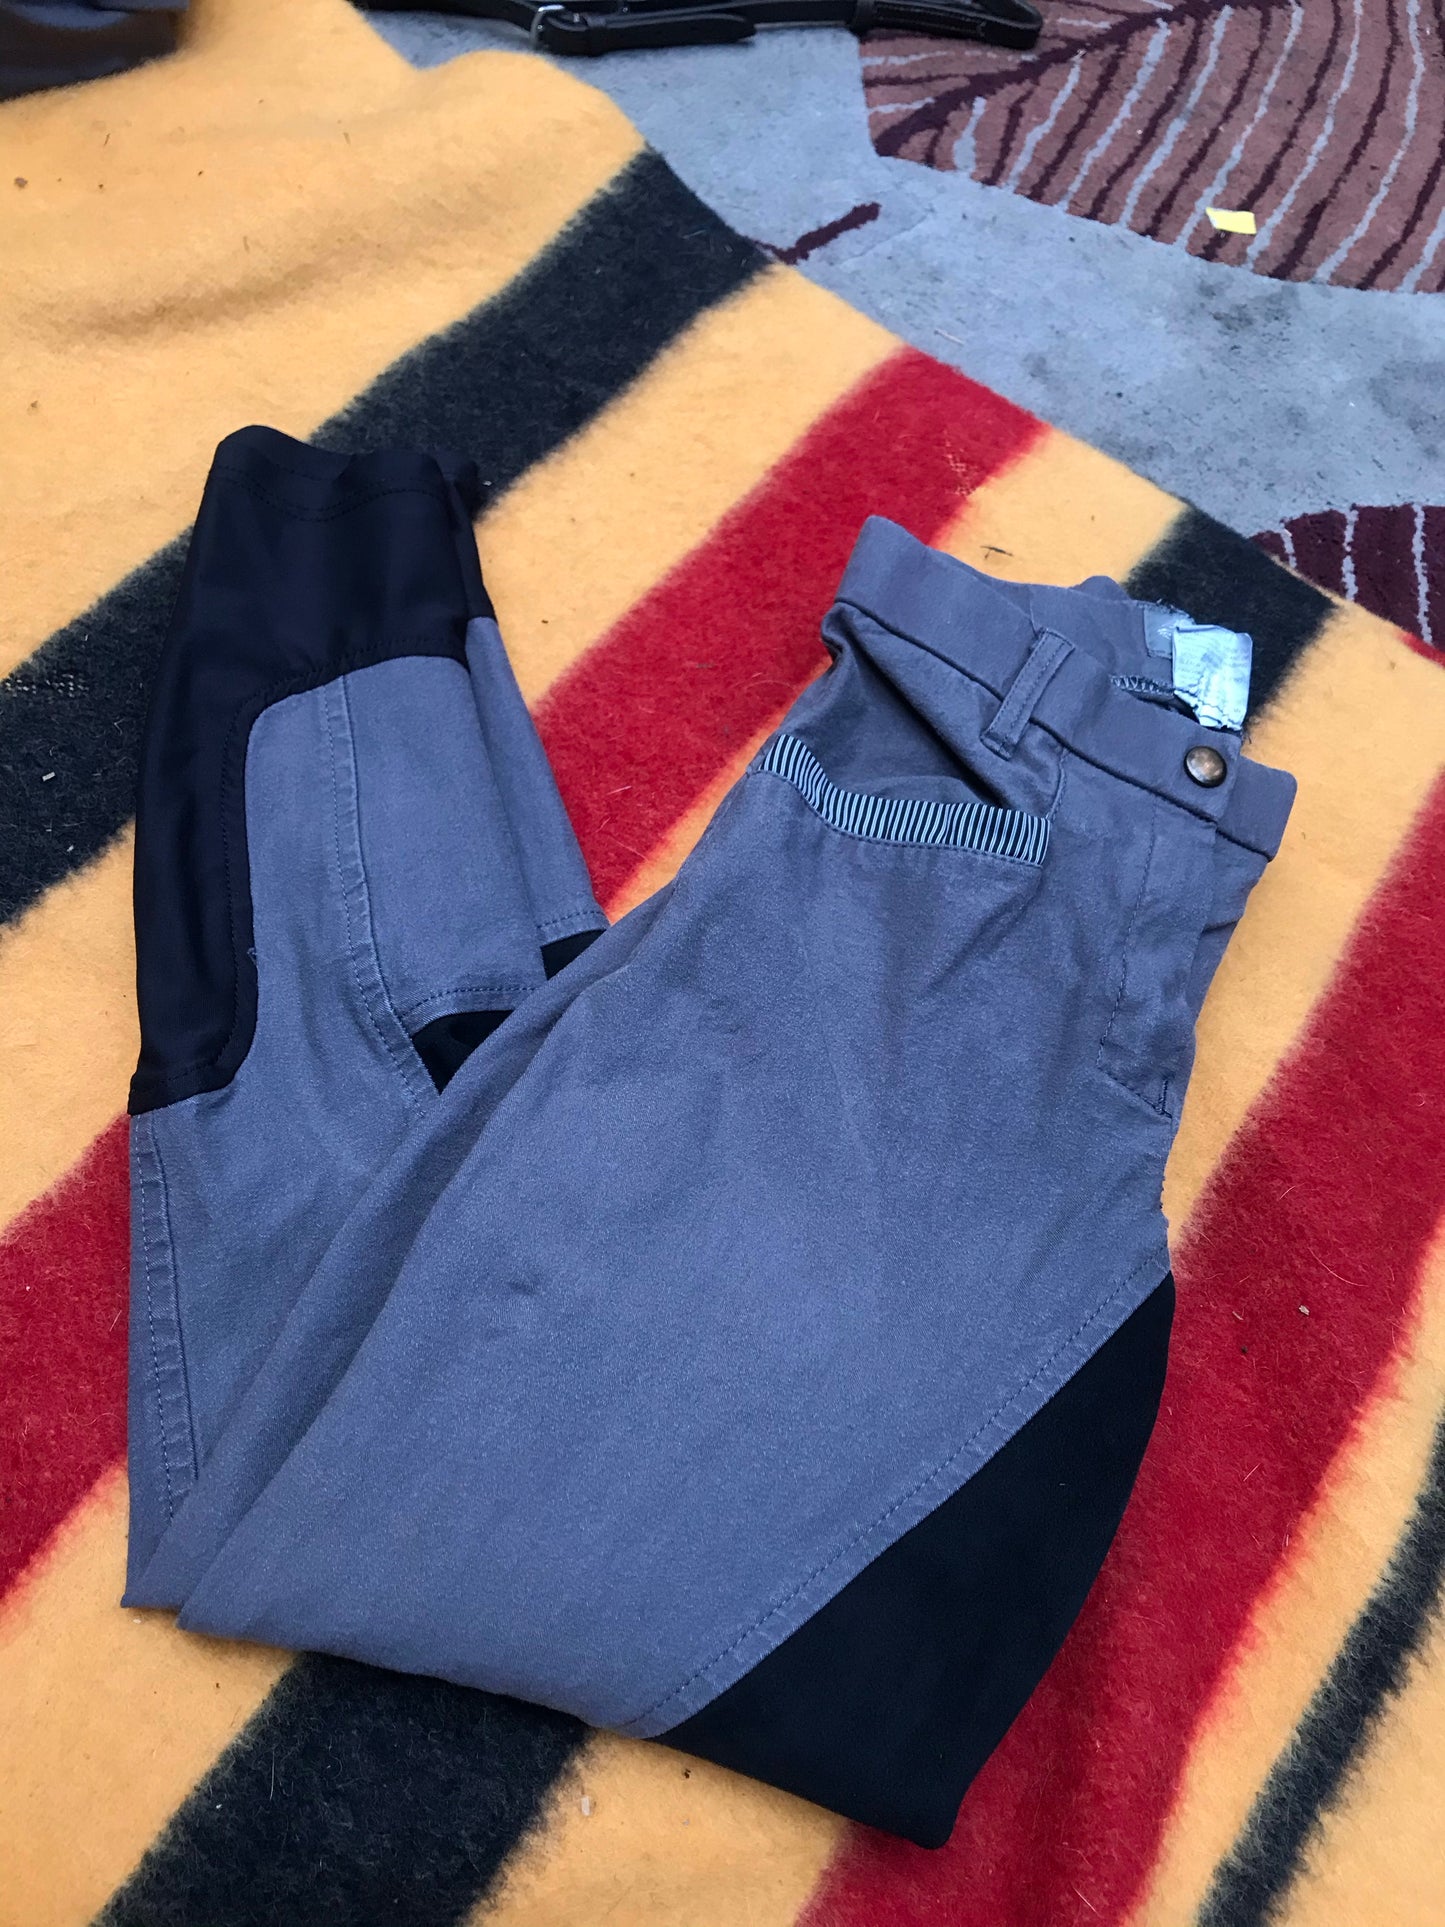 QJ riding wear size 6 grey and black breeches FREE POSTAGE